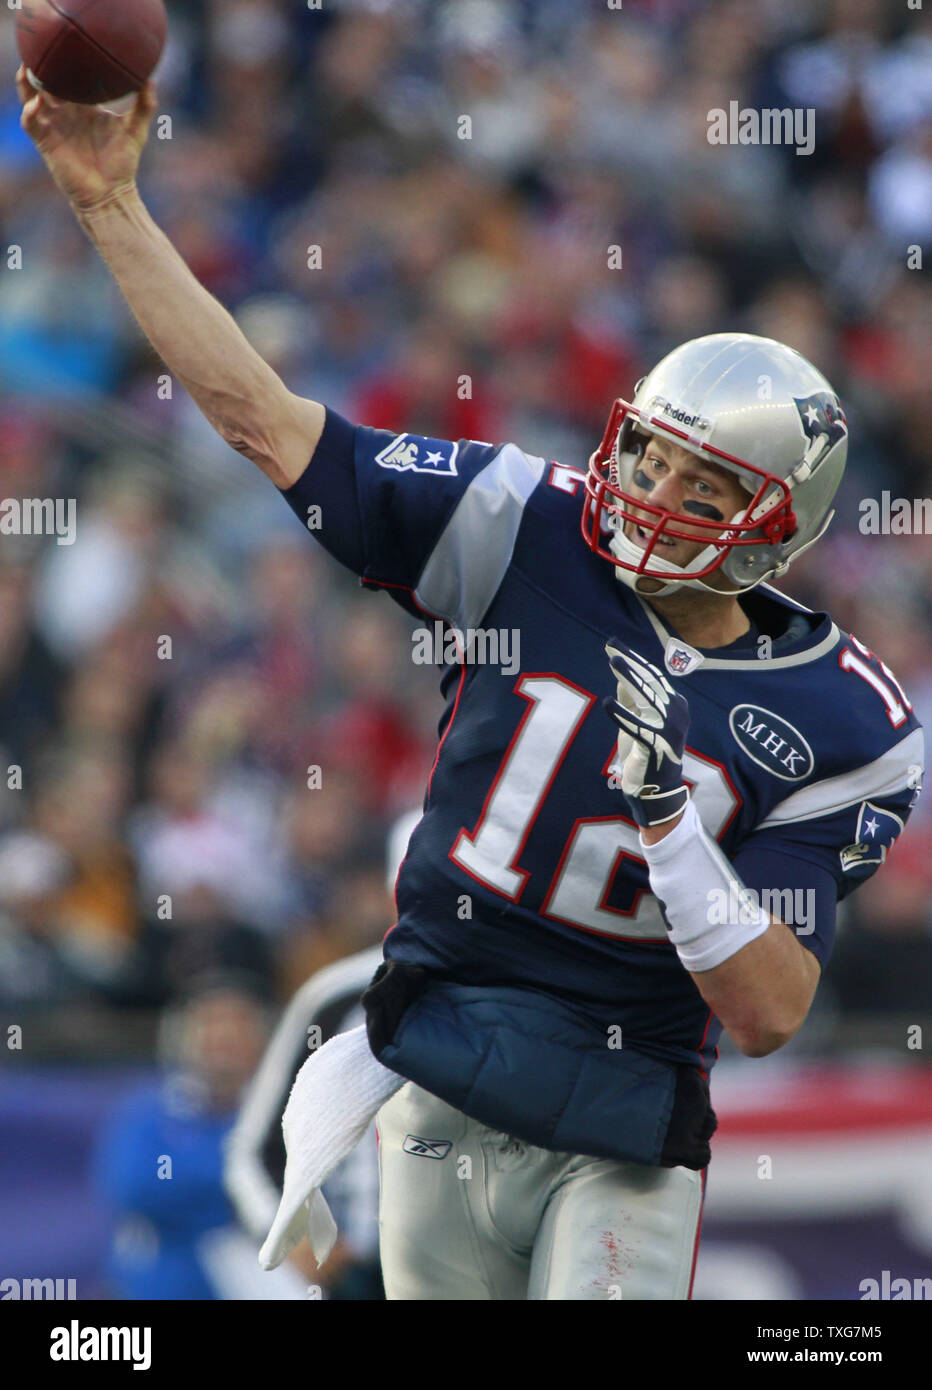 New England Patriots quarterback Tom Brady (12) throws a pass in the second quarter against the Indianapolis Colts at Gillette Stadium in Foxboro, Massachusetts on December 4, 2011.     UPI/Matthew Healey Stock Photo